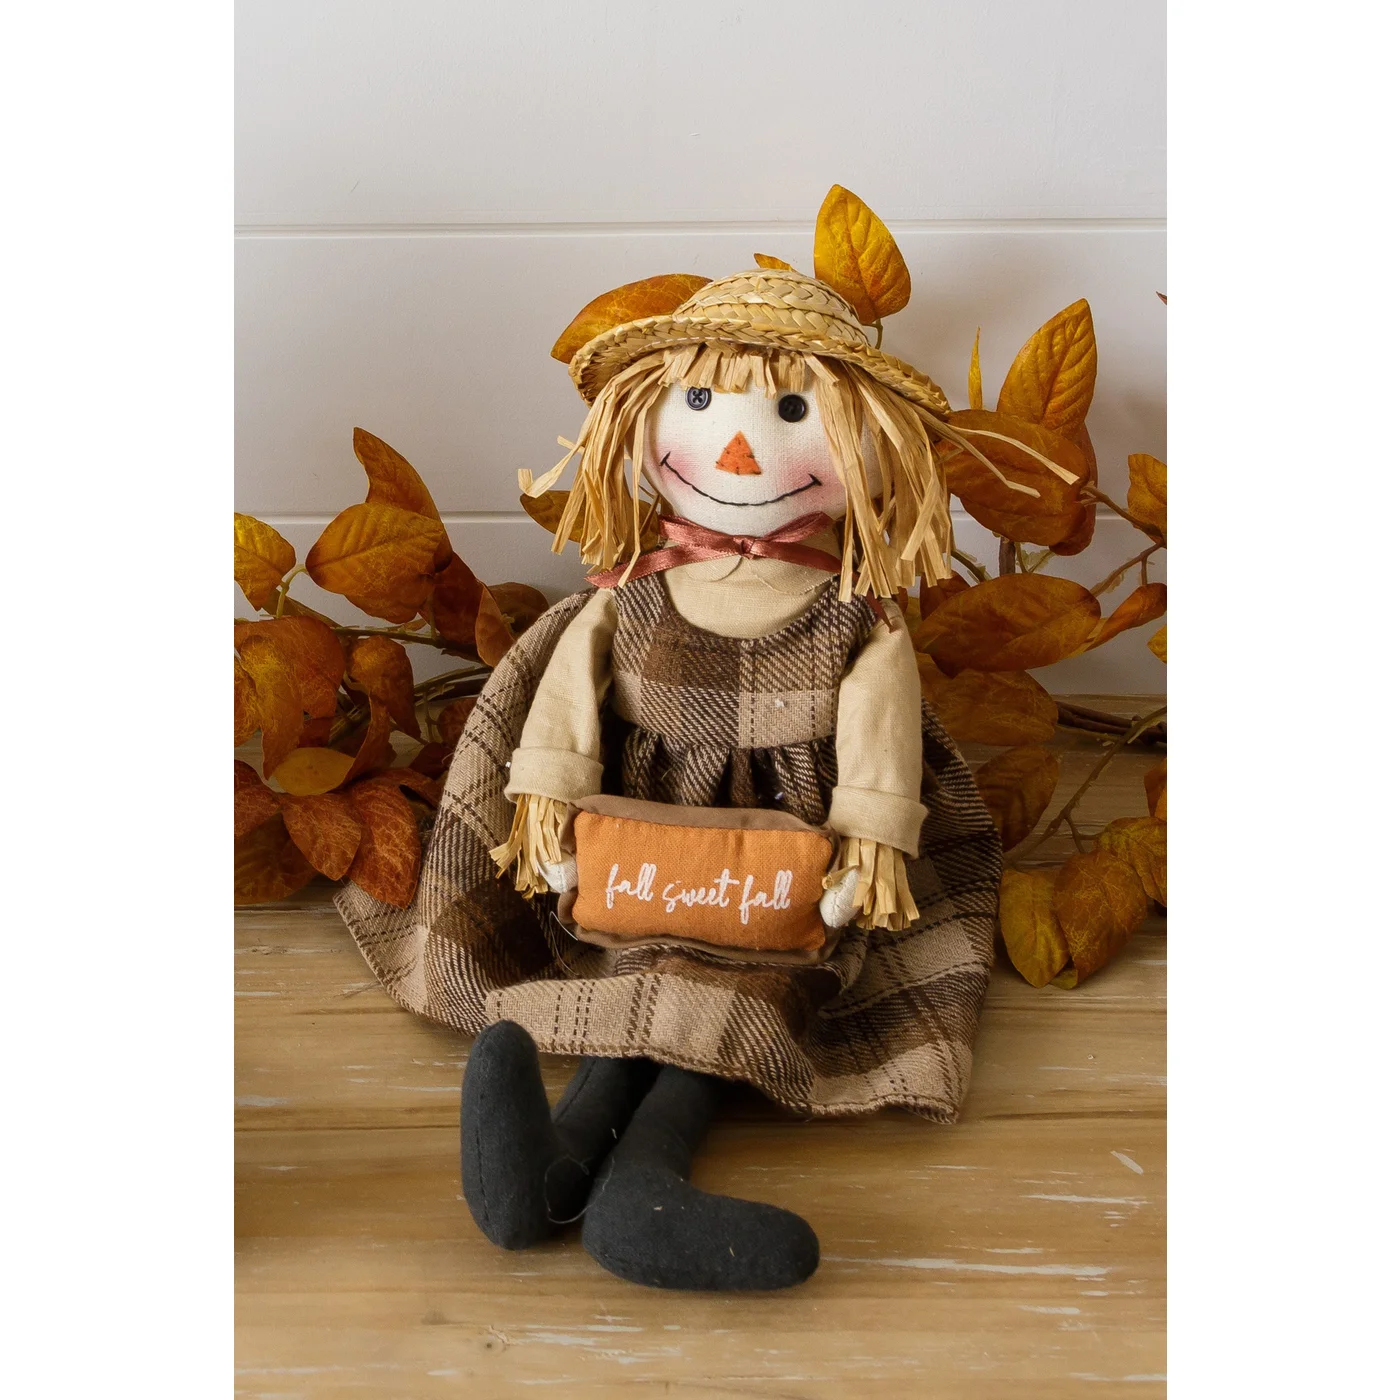 Scarecrow Girl Sitting Fabric Figure with Fall Sweet Fall Message